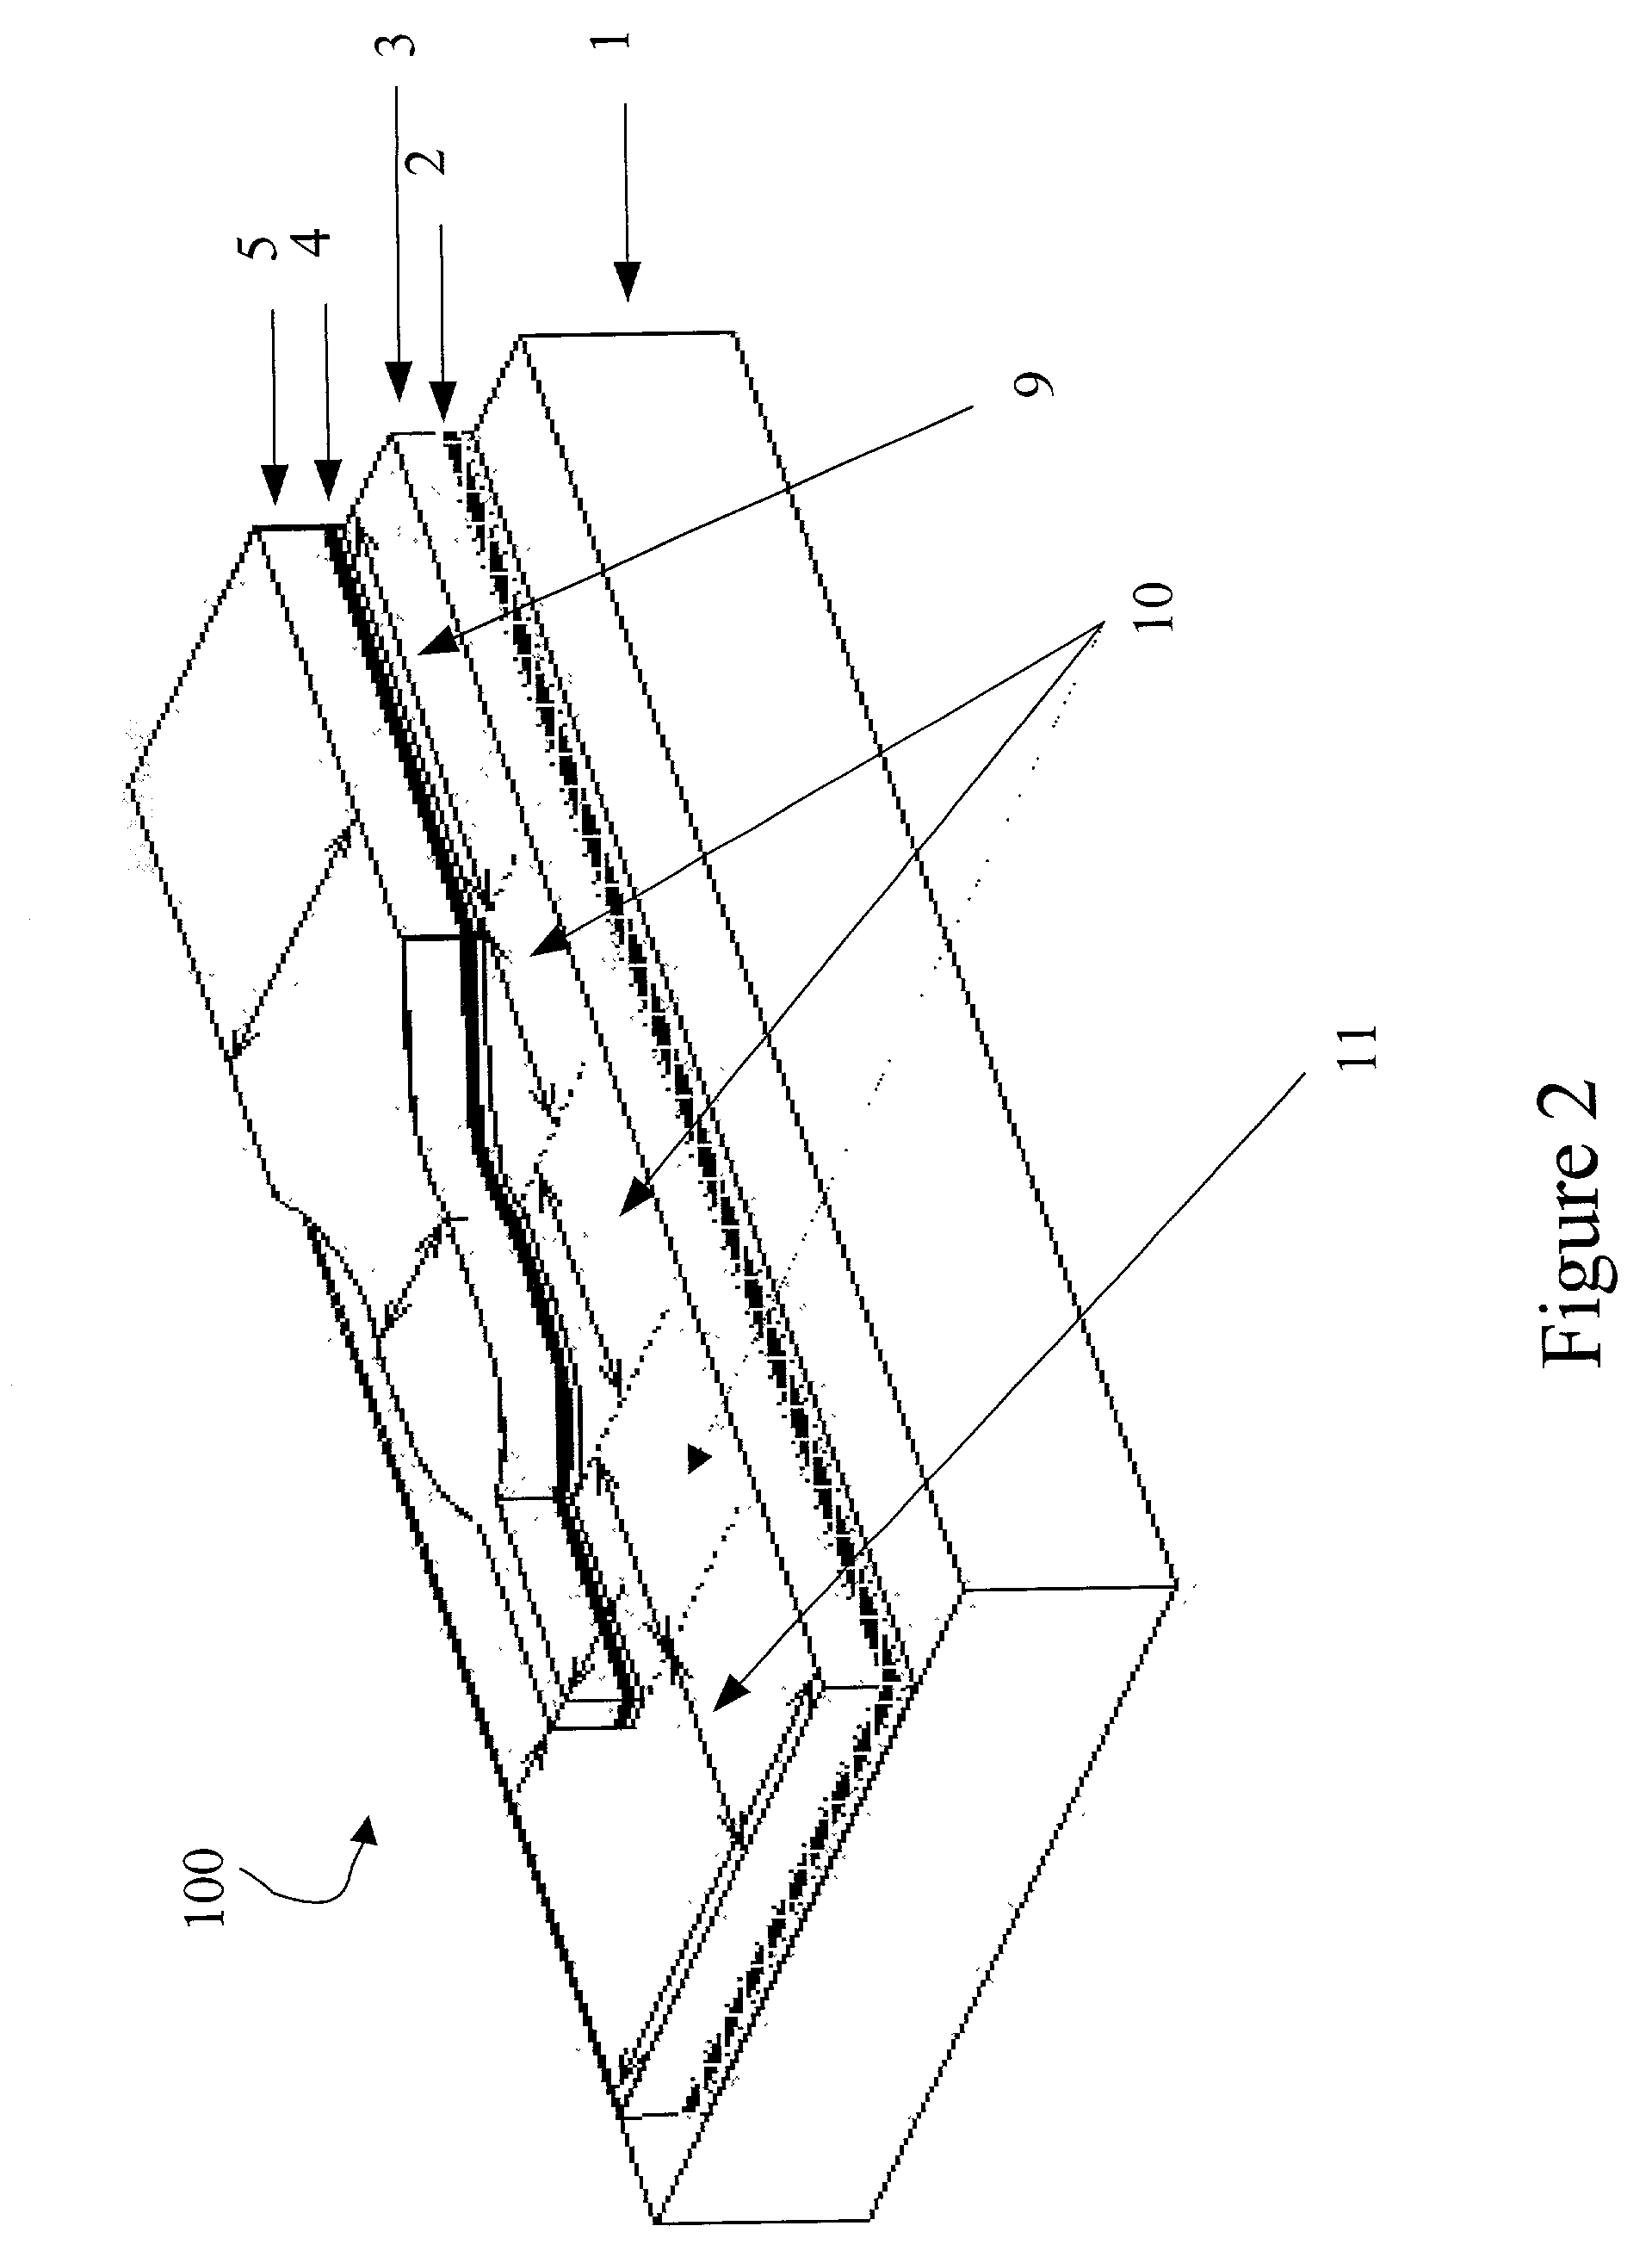 Semiconductor optical device with improved efficiency and output beam characteristics